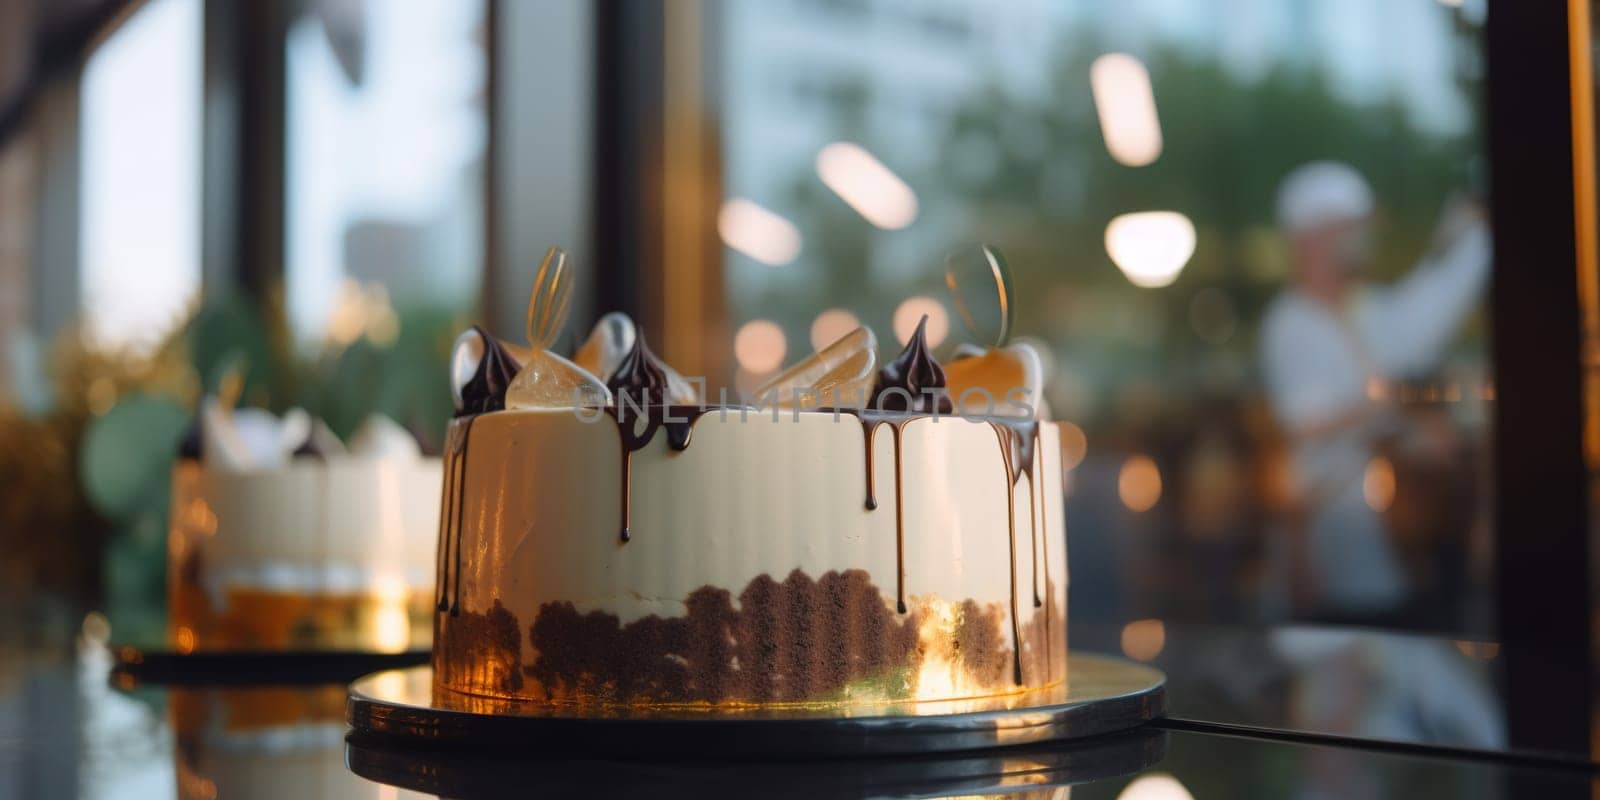 Close-up of a chocolate cake standing in a display case with blurred background